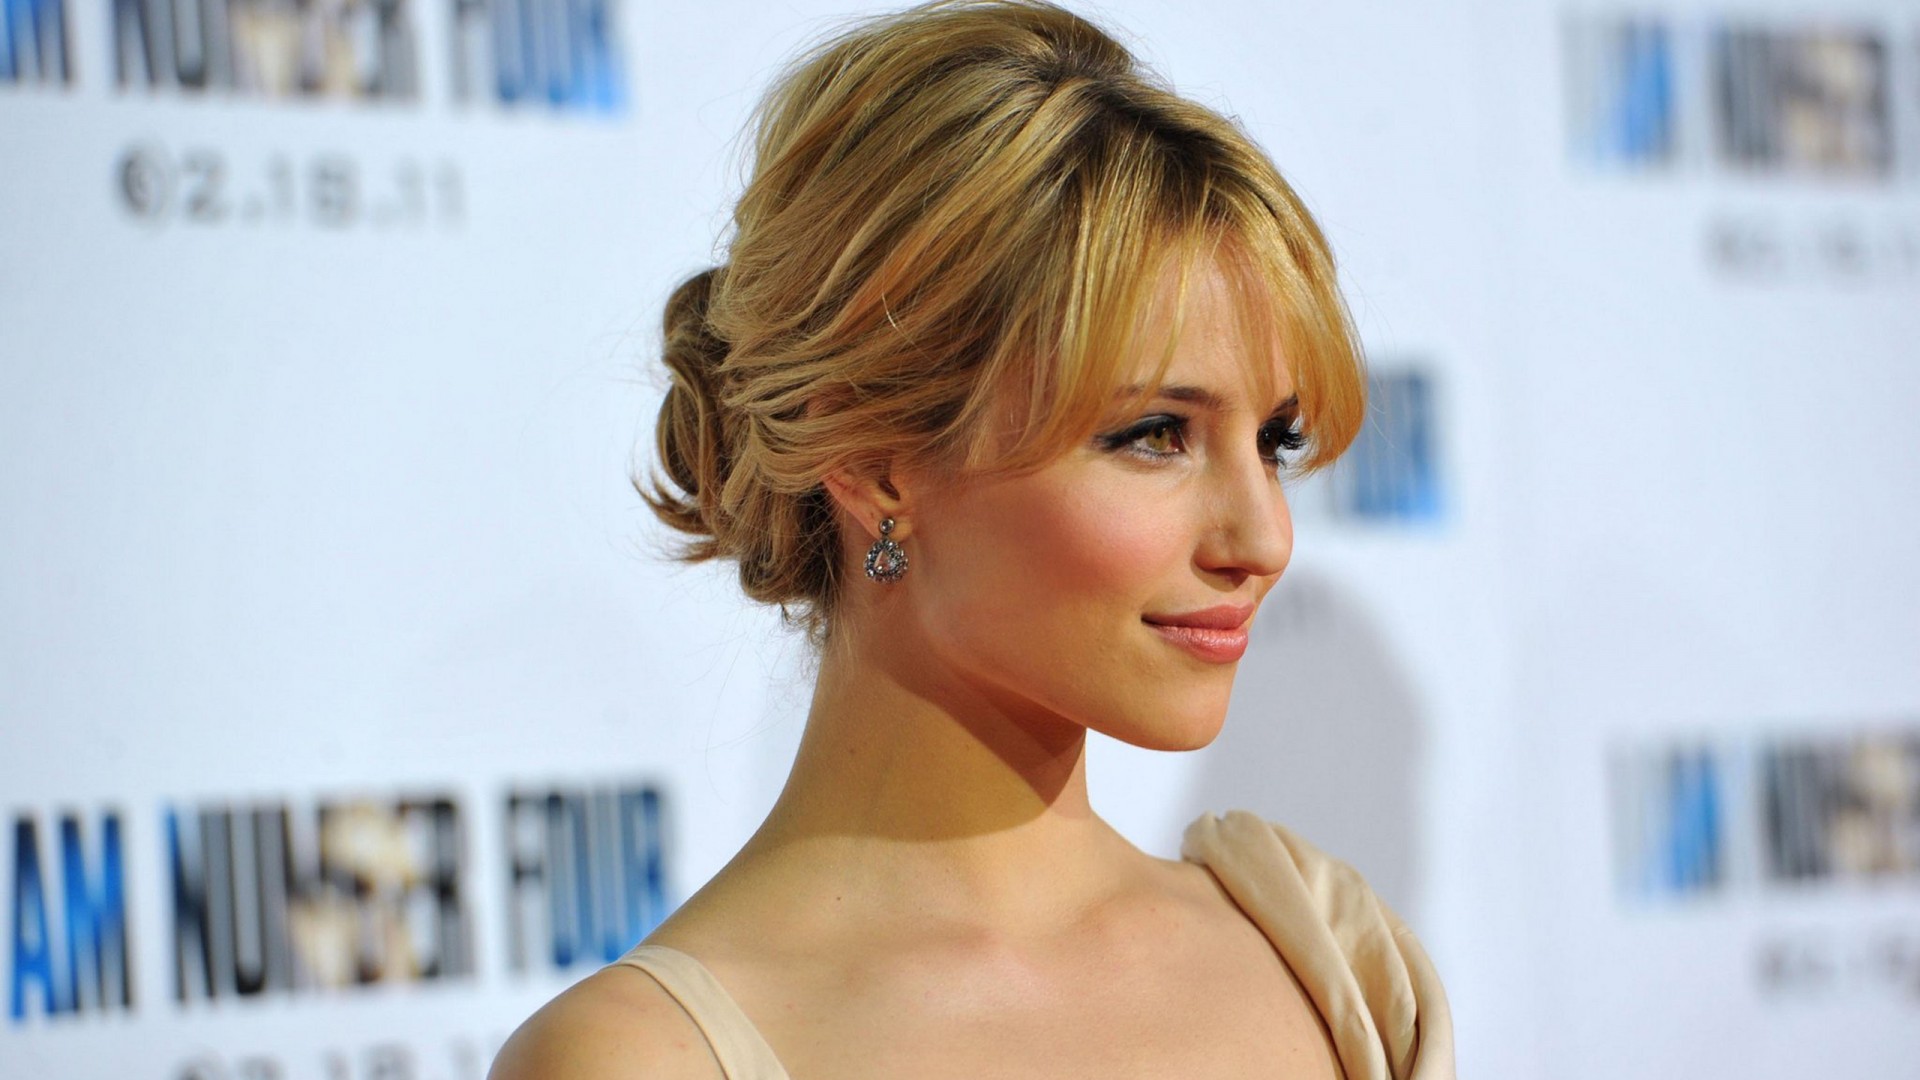 Dianna Agron 2 HD Wallpaper - iHD Wallpapers